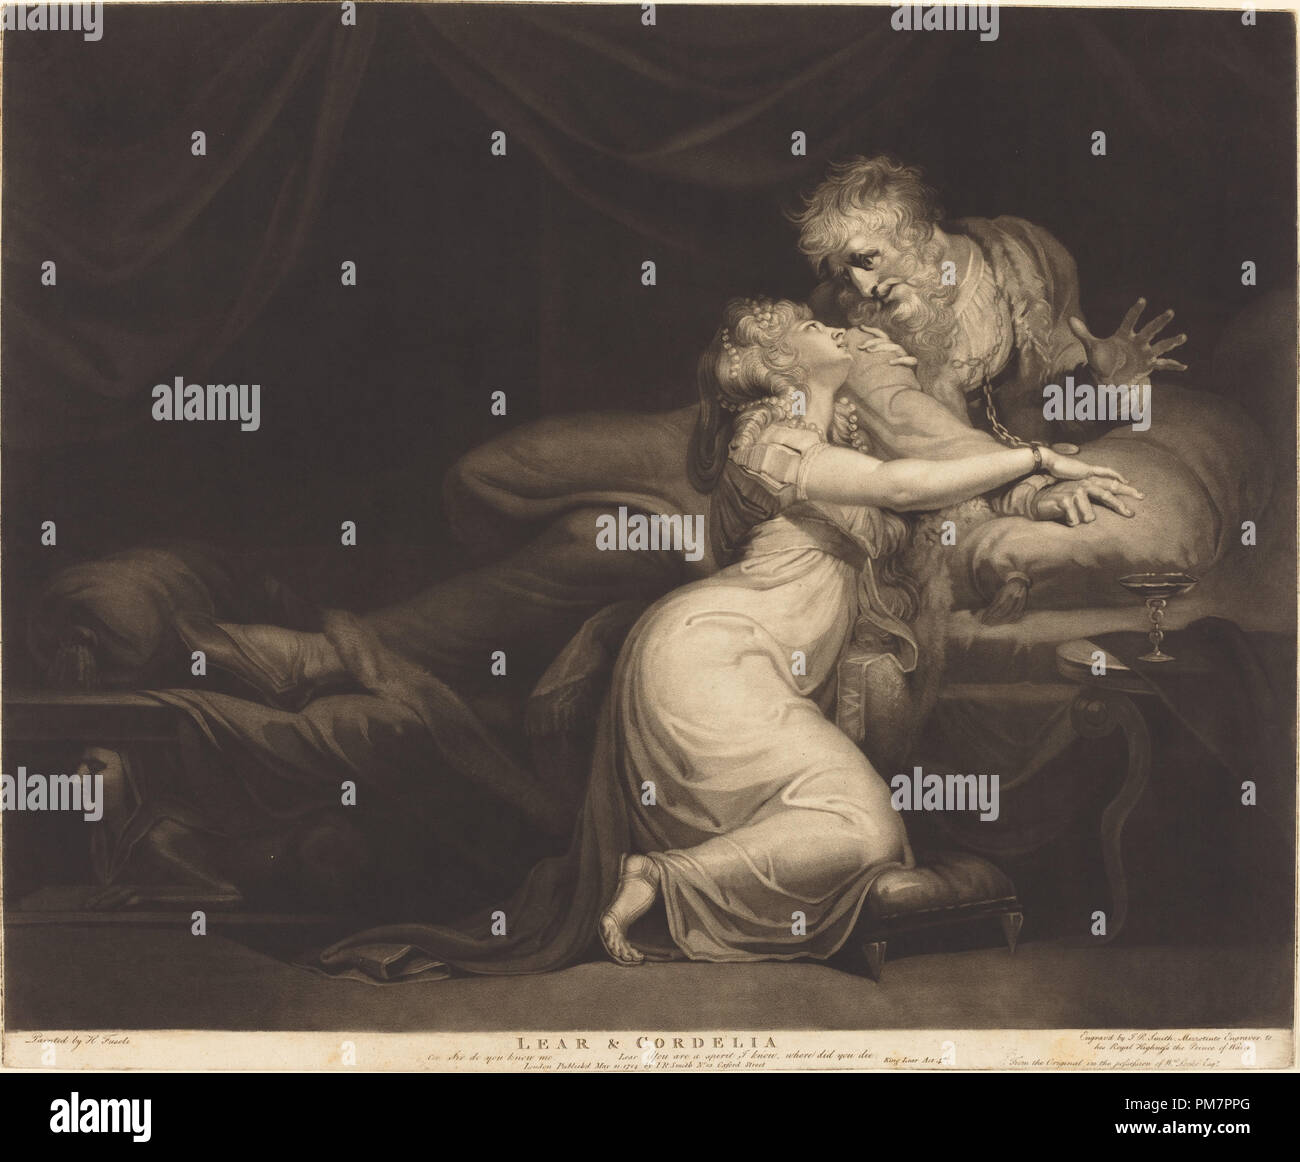 Lear and Cordelia. Dated: 1784. Dimensions: plate: 45.7 x 55.3 cm (18 x 21 3/4 in.). Medium: mezzotint on laid paper. Museum: National Gallery of Art, Washington DC. Author: John Raphael Smith after Henry Fuseli. Stock Photo